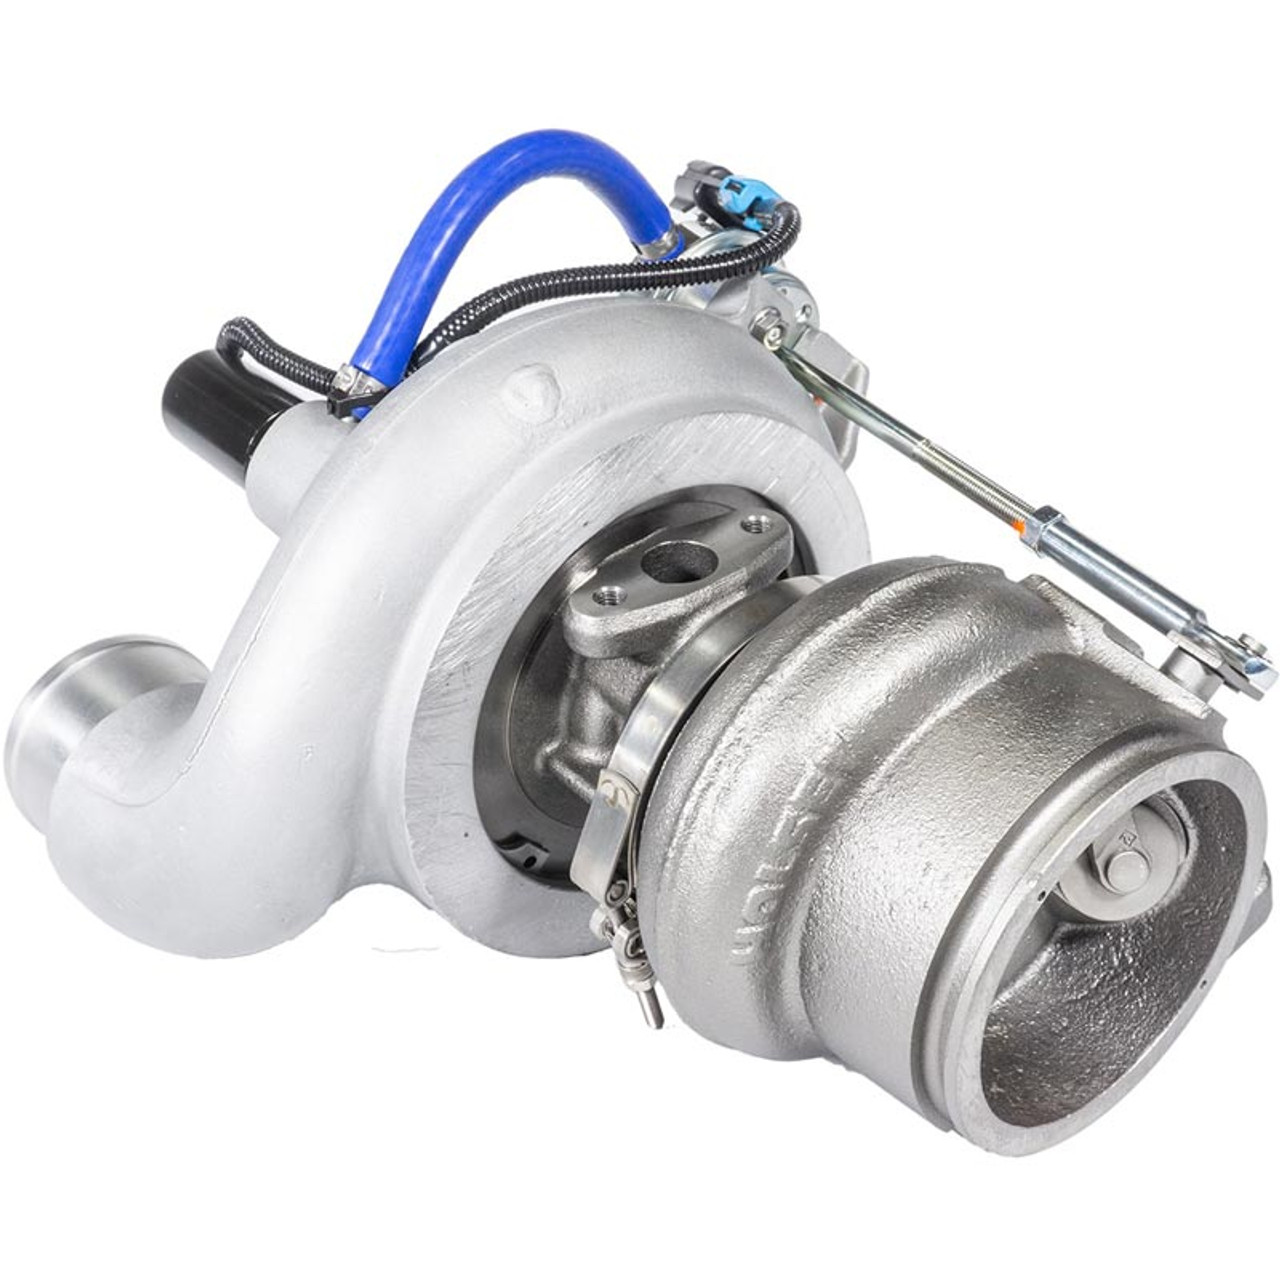 INDUSTRIAL INJECTION REMANUFACTURED STOCK HE351CW TURBO 2004.5-2007 DODGE 5.9L CUMMINS (II4037001SE)-ANGLE VIEW